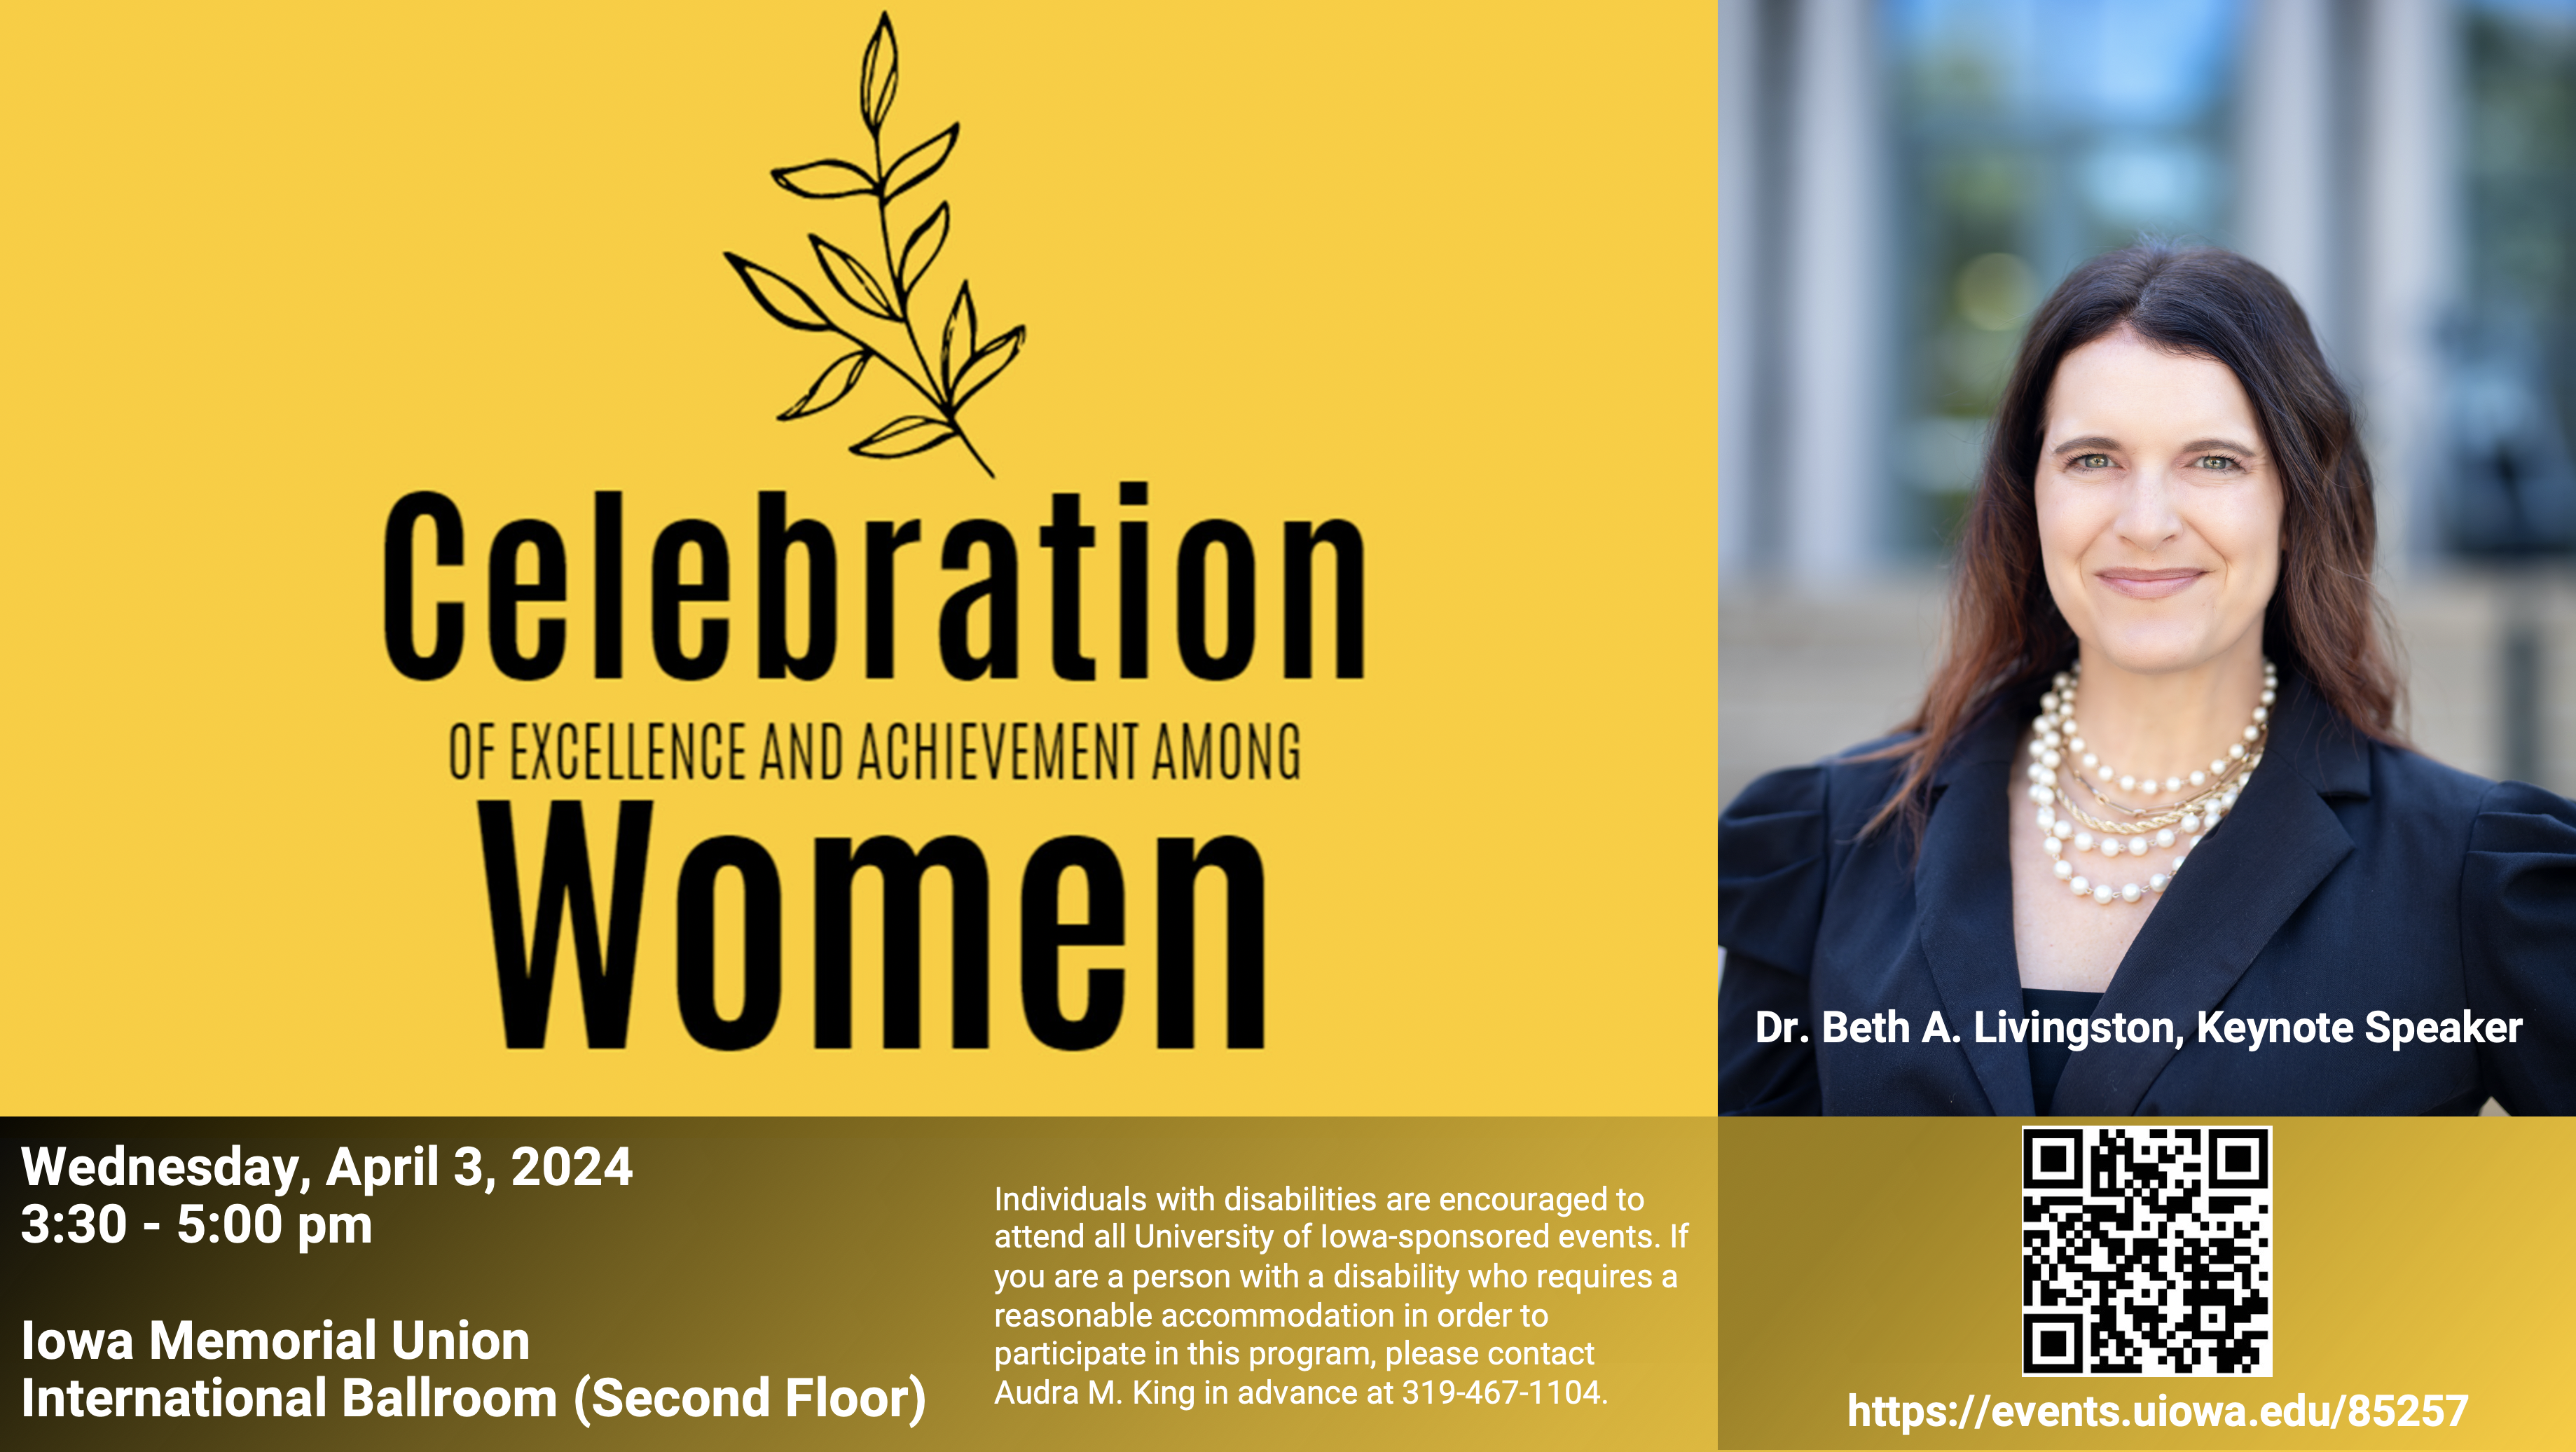 Celebration of Excellence in Women - Wednesday, April 3, 20243:30 - 5:00 pm Iowa Memorial UnionInternational Ballroom (Second Floor) Dr. Beth A. Livingston, Keynote Speaker Individuals with disabilities are encouraged to attend all University of Iowa-sponsored events. If you are a person with a disability who requires a reasonable accommodation in order to participate in this program, please contact Audra M. King in advance at 319-467-1104.